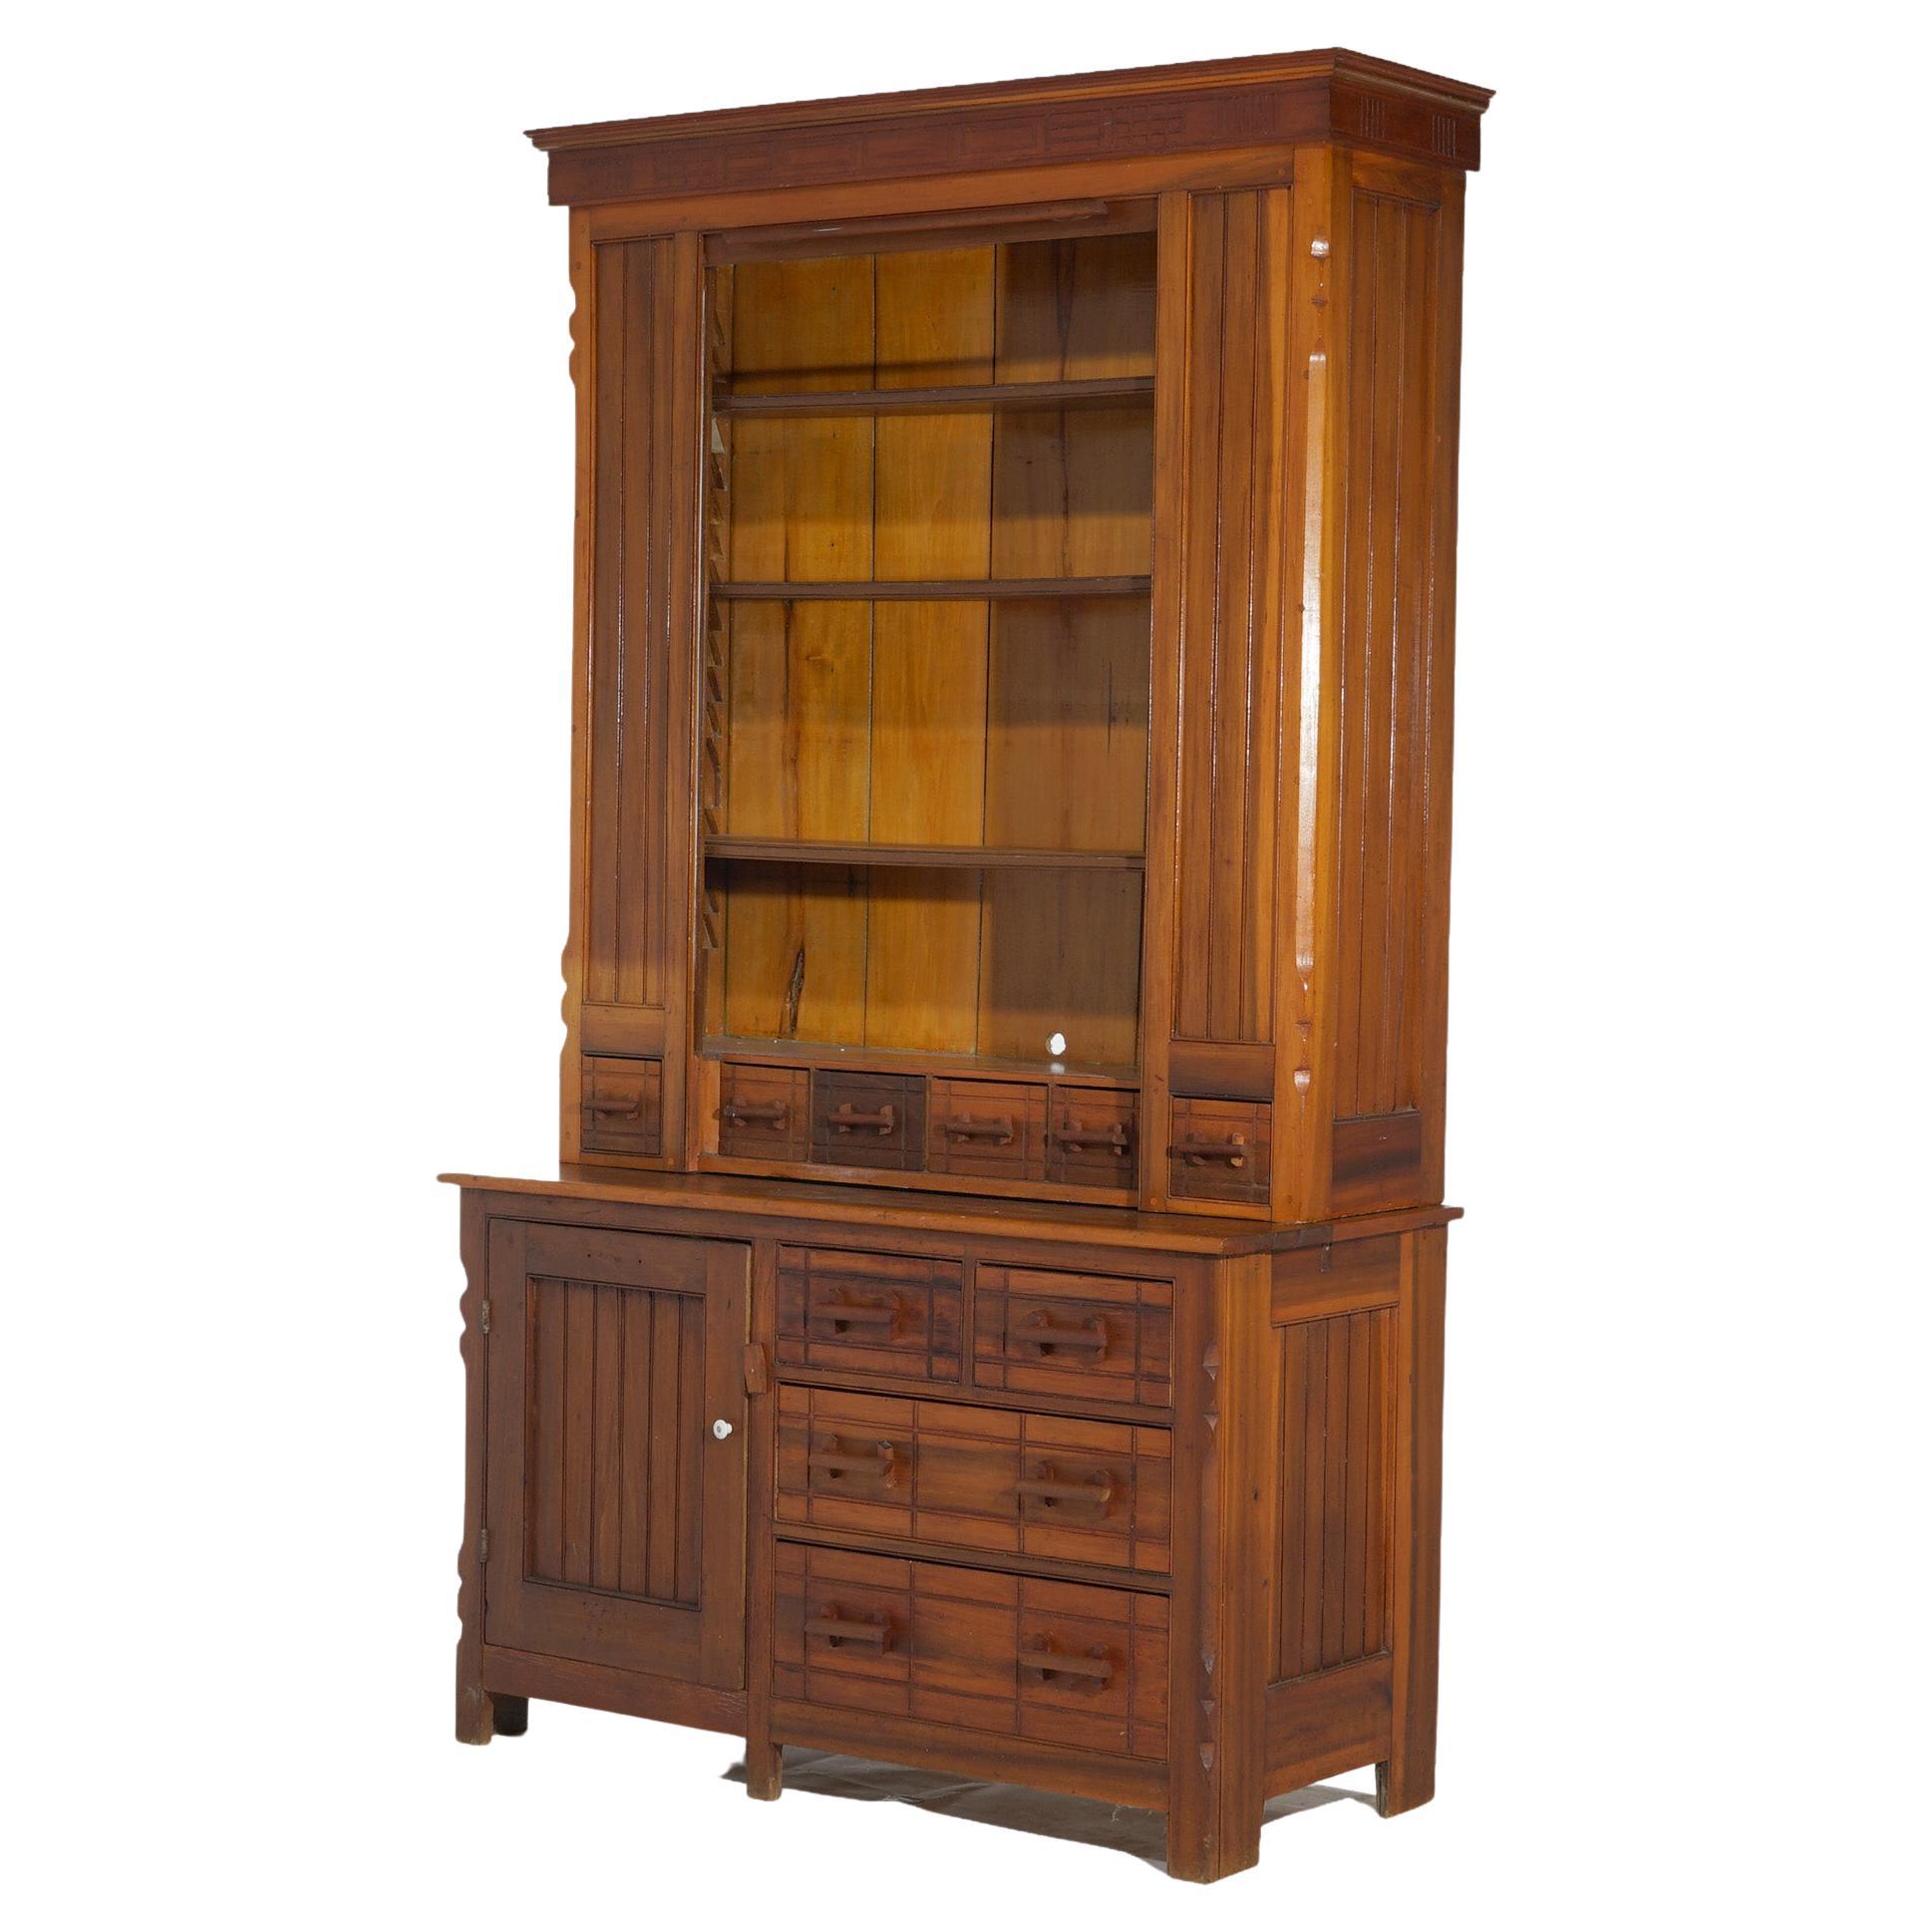 An antique oversized country store cabinet offers upper tambour roll-top case opening to shelved interior over lower case with drawers and cabinet, circa 1900

Measures - 87.25